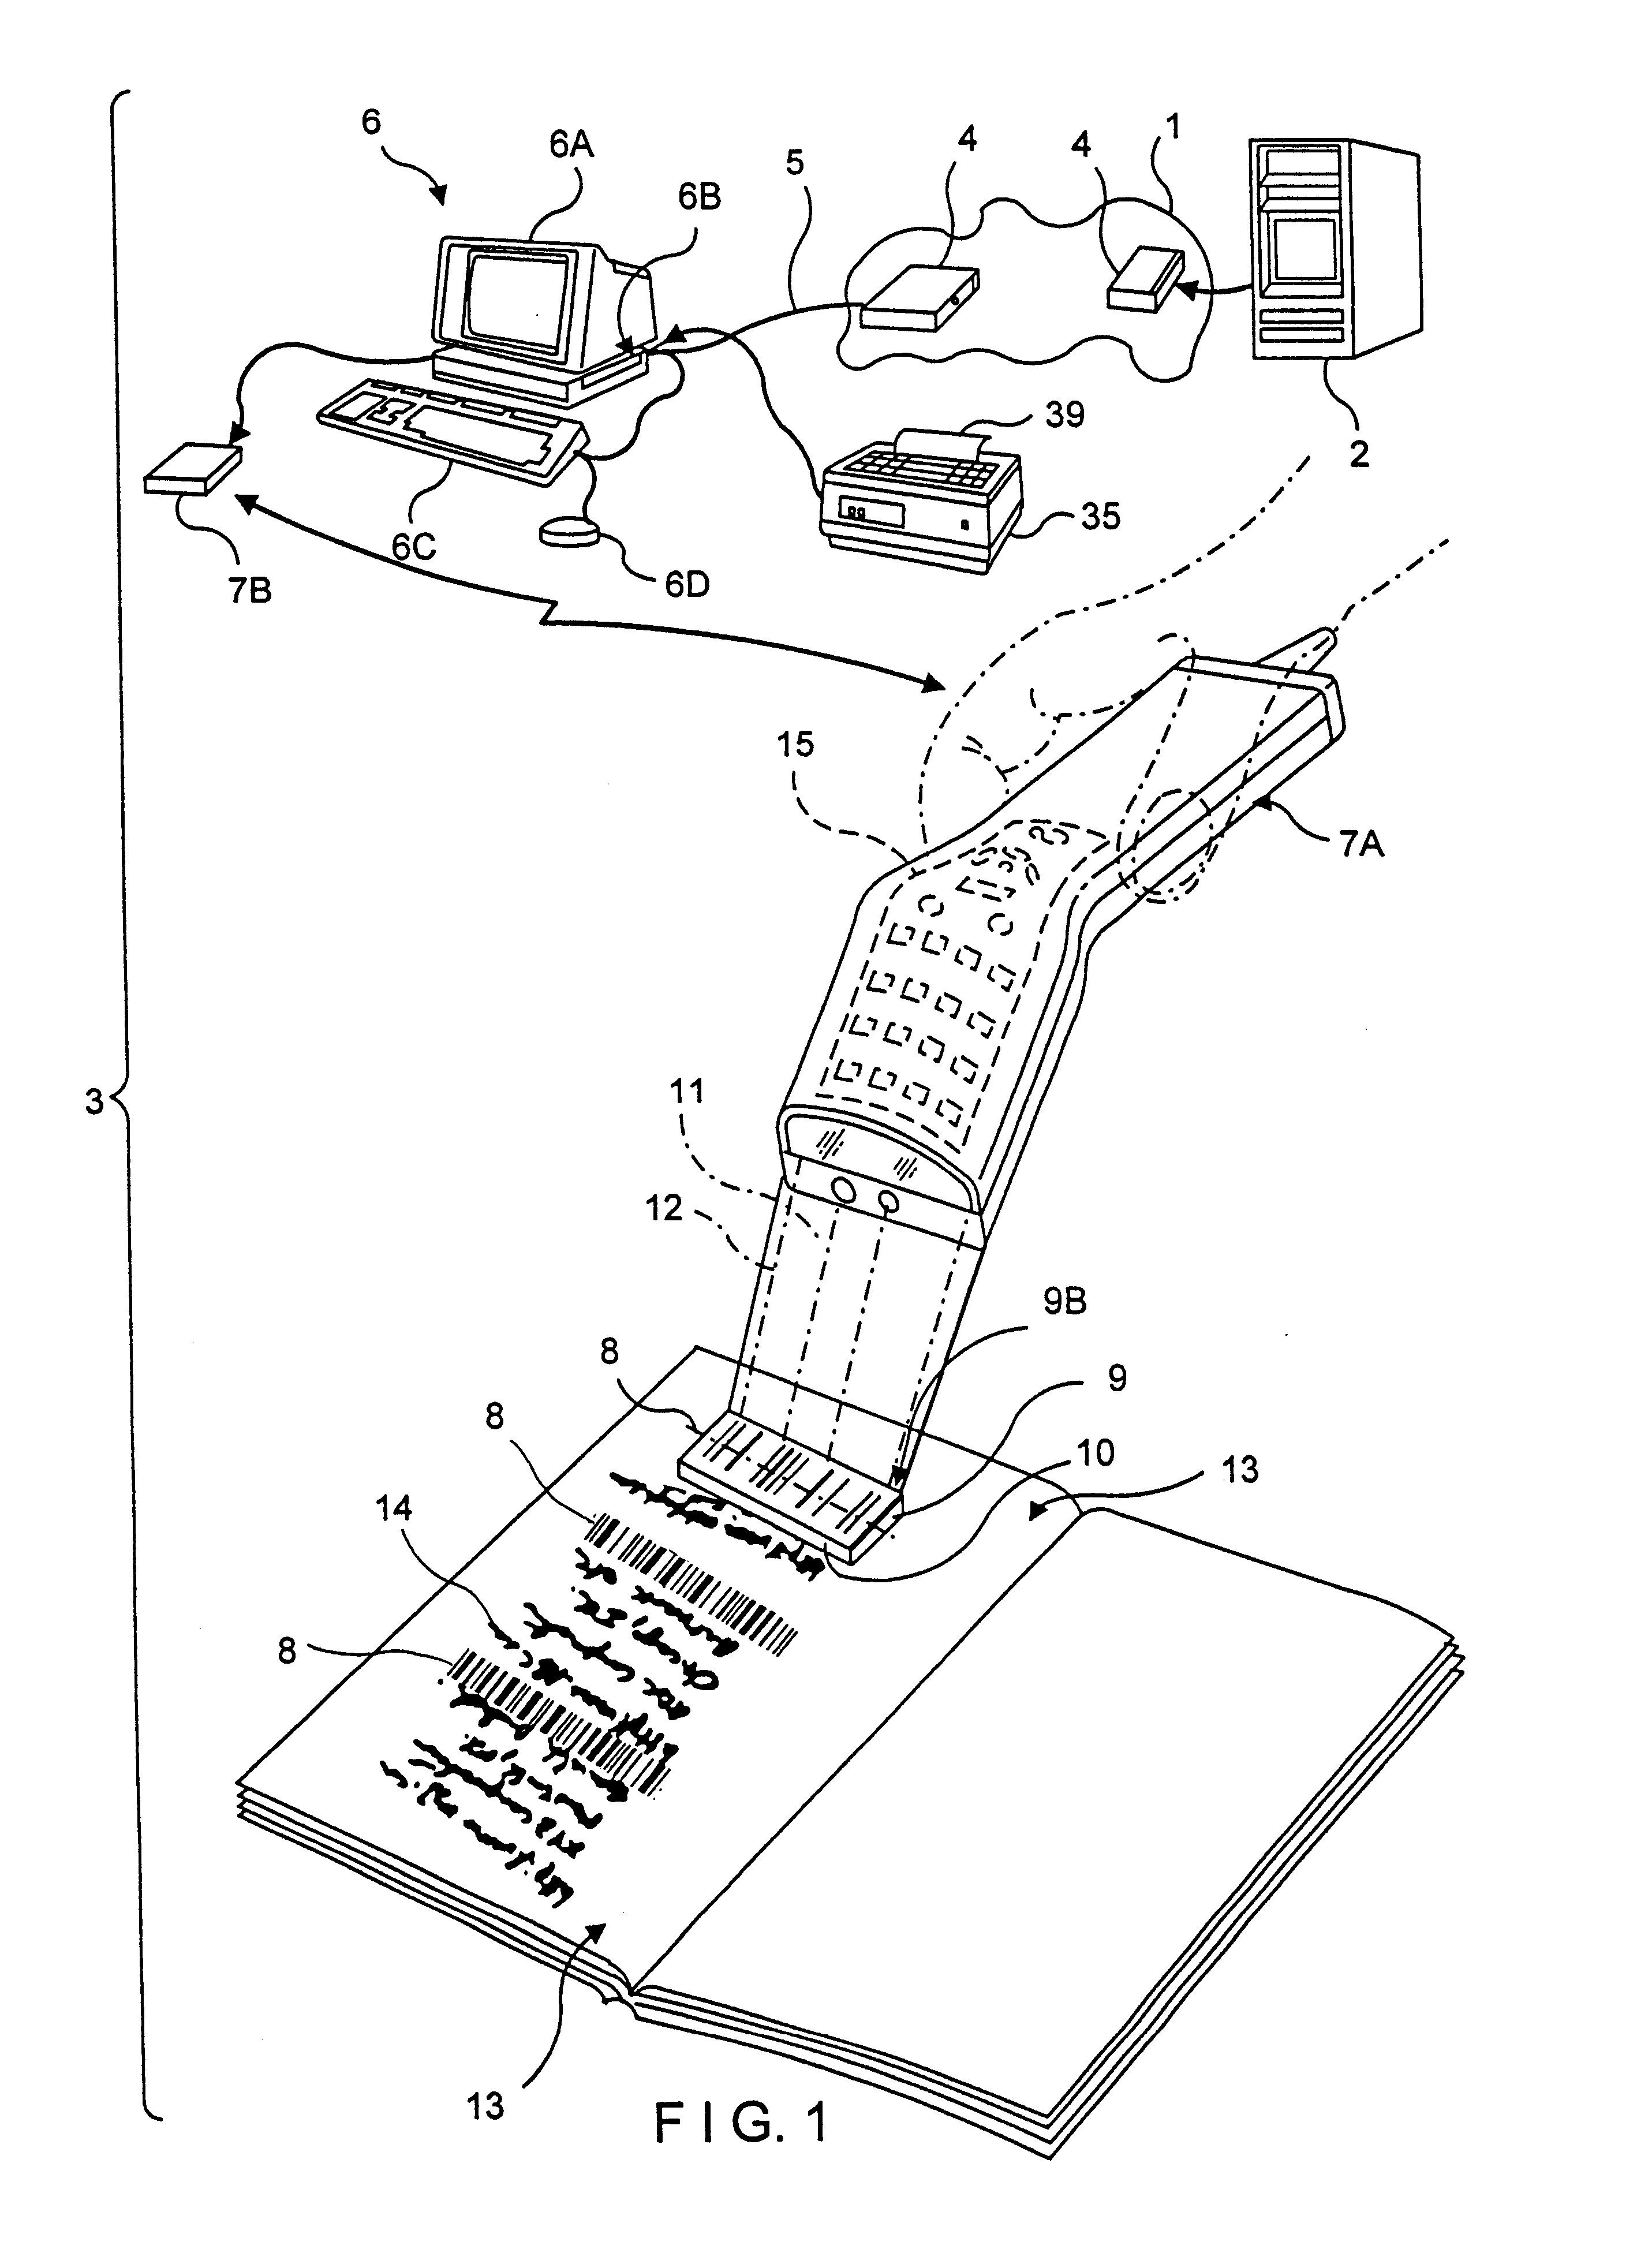 System and method for carrying out information-related transactions